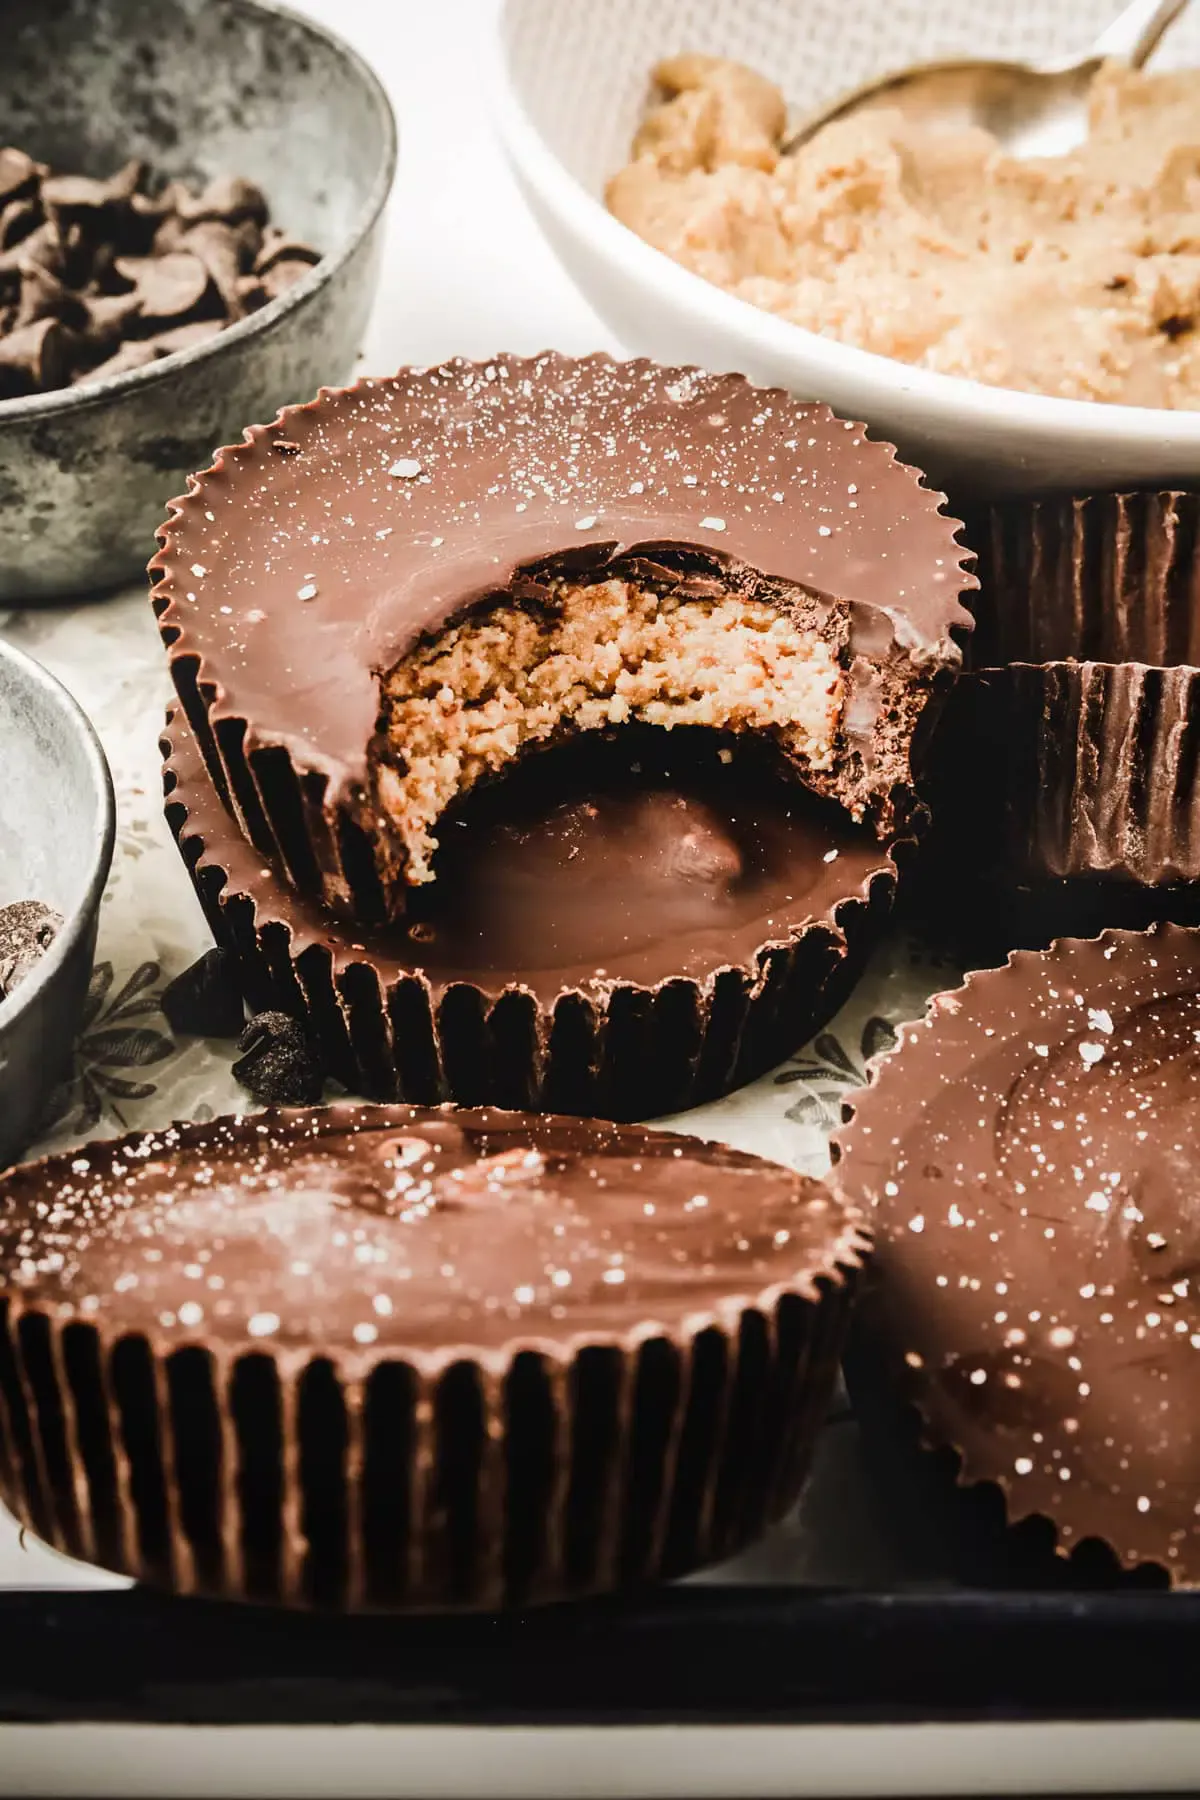 Peanut butter cups on a tray